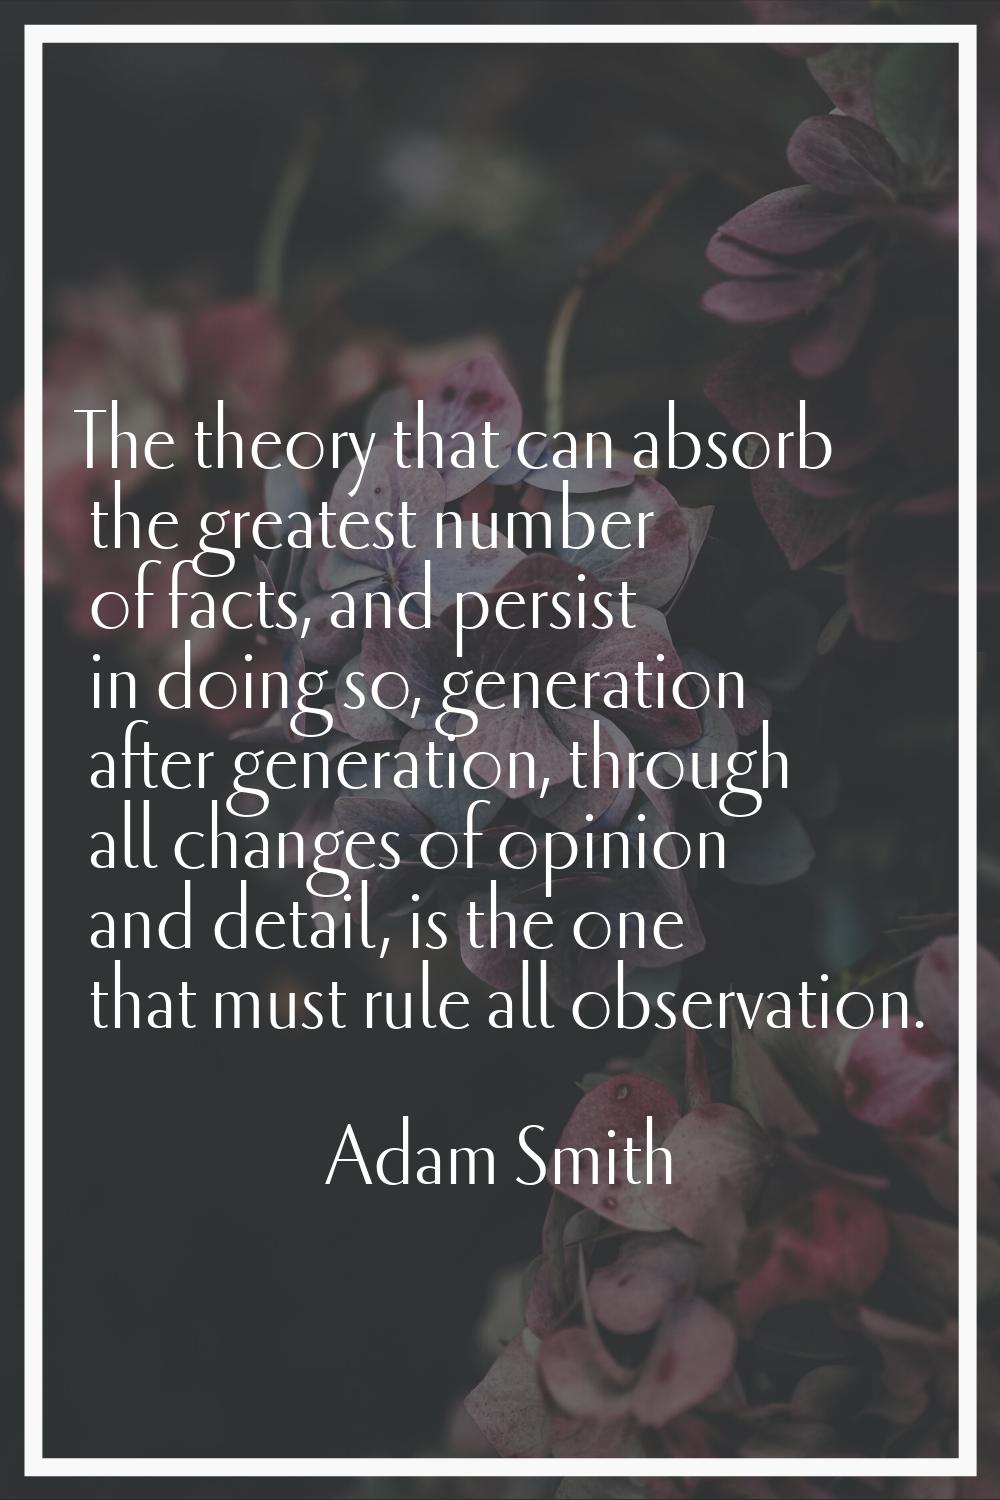 The theory that can absorb the greatest number of facts, and persist in doing so, generation after 